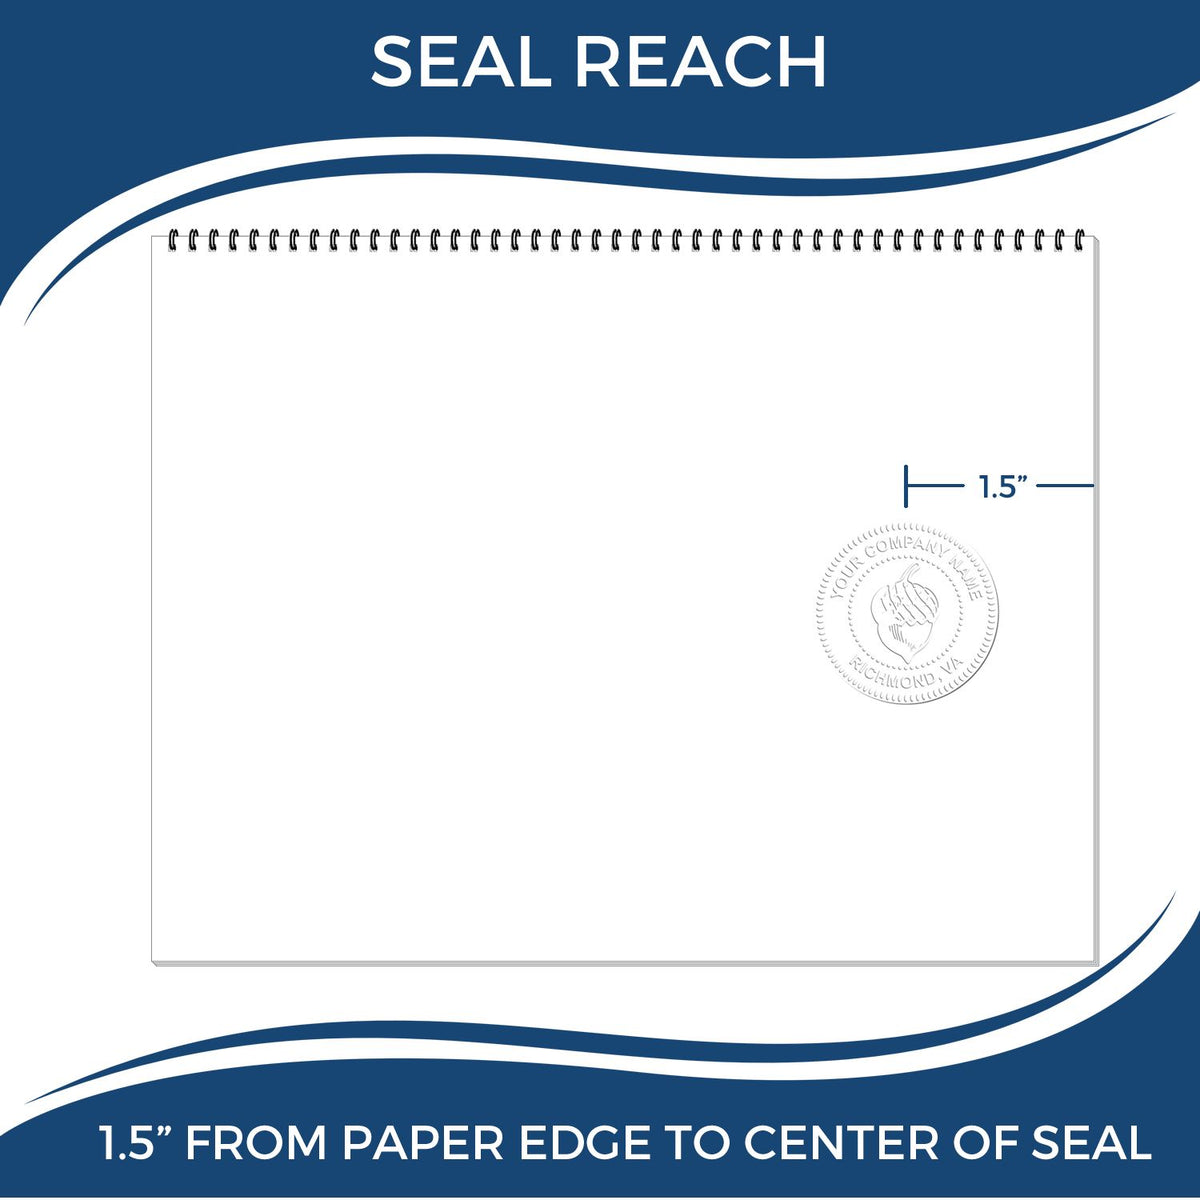 An infographic showing the seal reach which is represented by a ruler and a miniature seal image of the Gift North Dakota Architect Seal